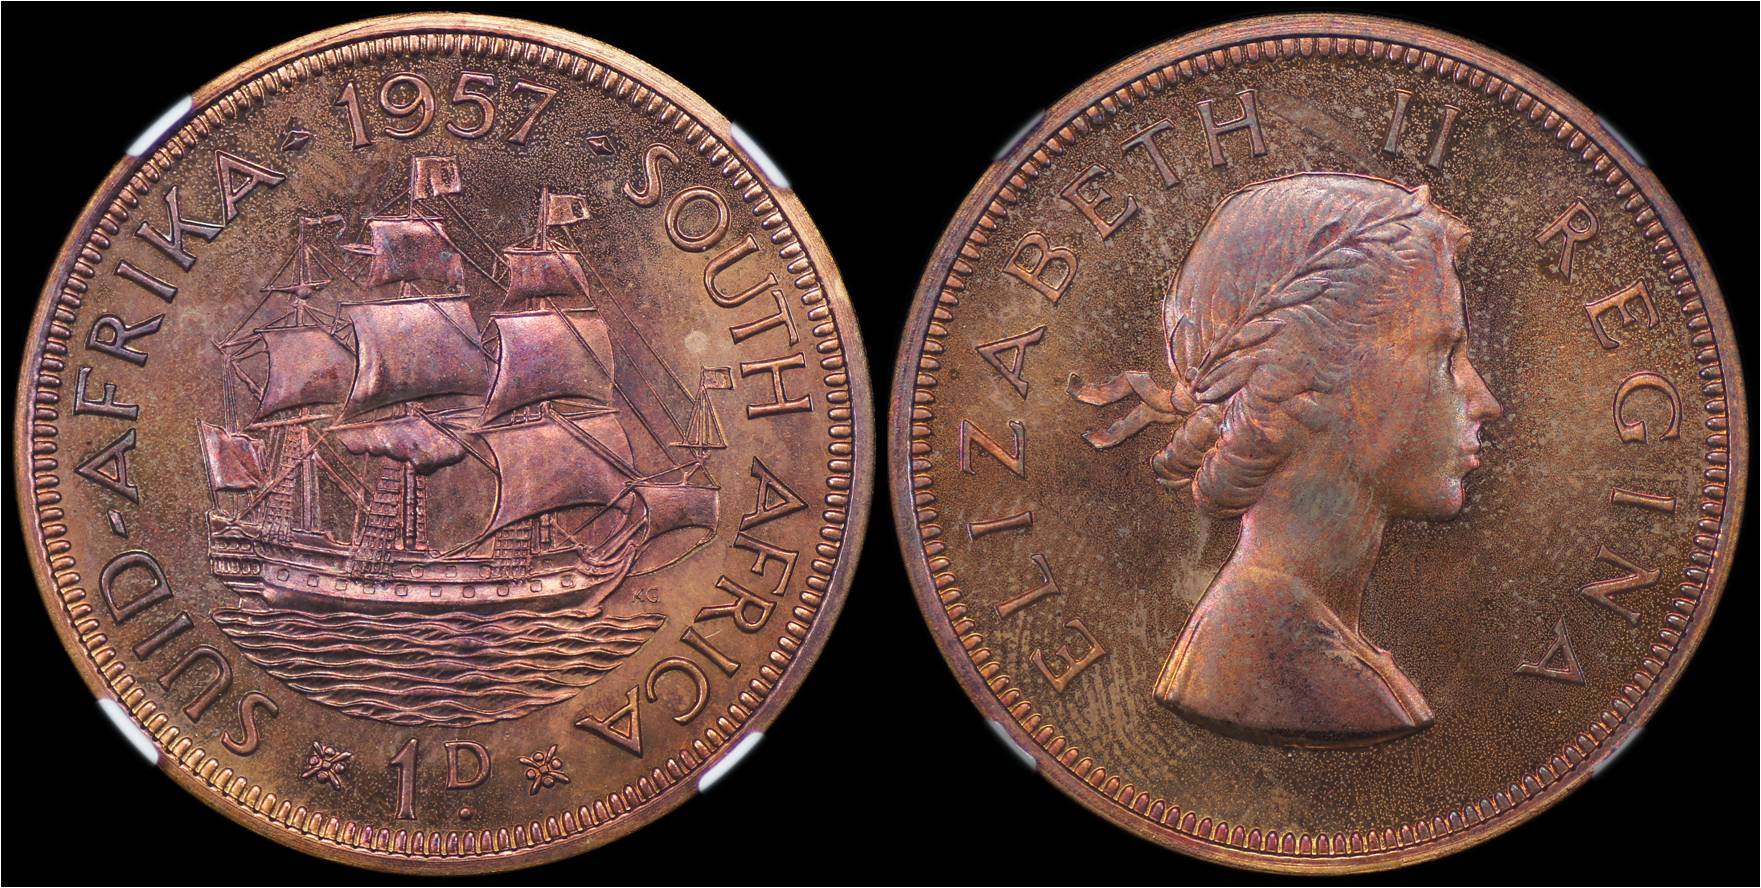 South Africa 1957 Penny proof.jpg